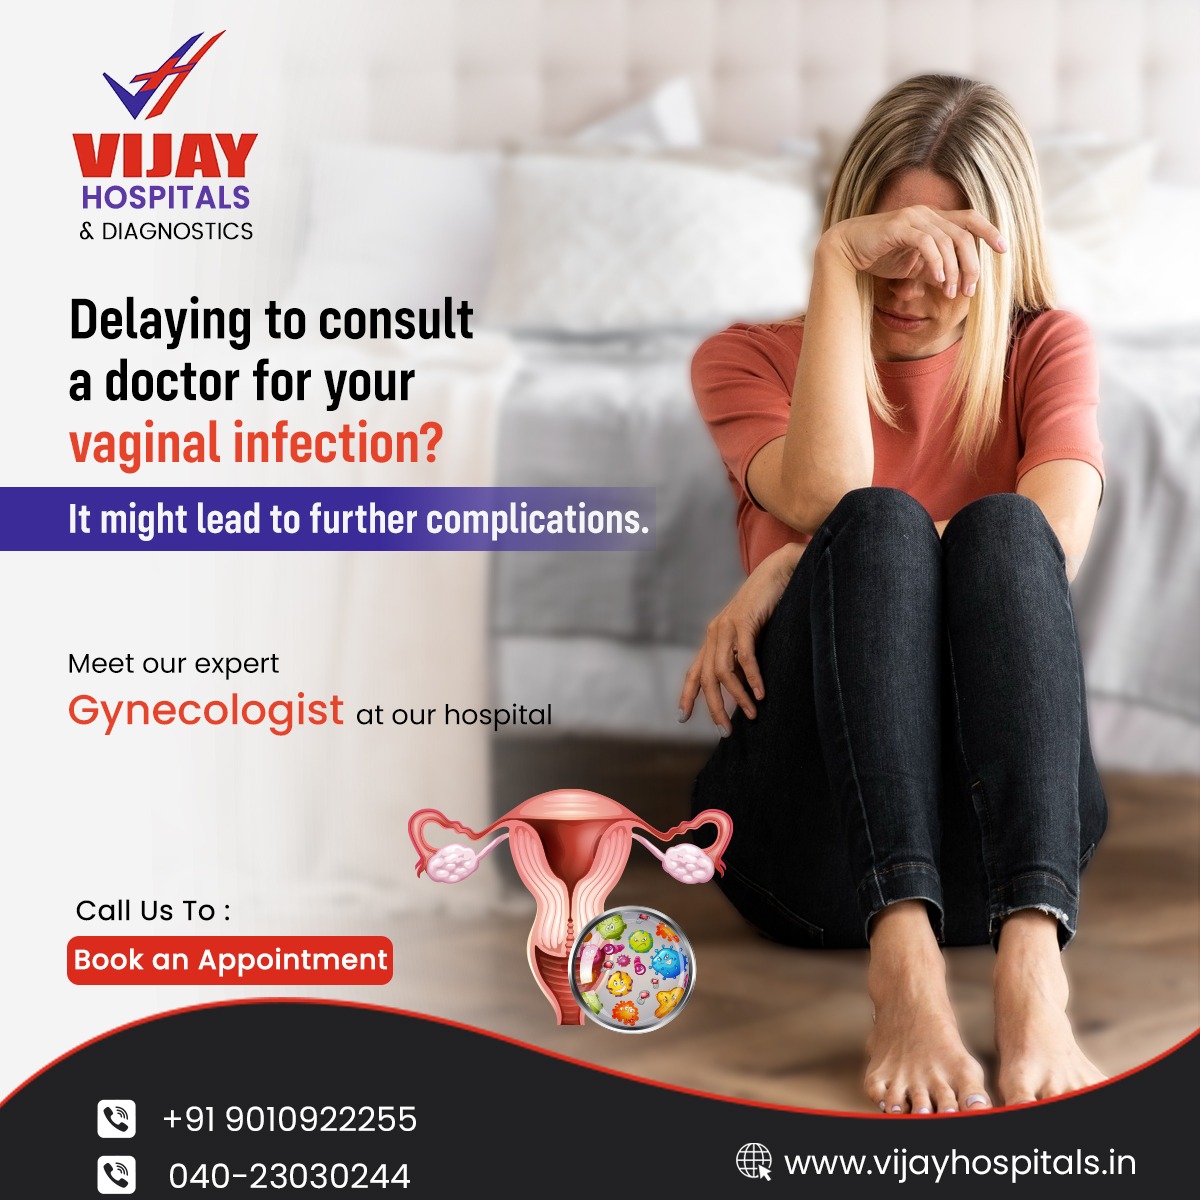 Delaying to consult with a gynecologist for your vaginal infection can lead to further complications and negative health outcomes. 
For more information:
Call us: +91 90109 22255 / 040-23030244

#vijayhospital #gynaecology #GYNAECOLOGIST #multispecialityhospital #vaginalinfection